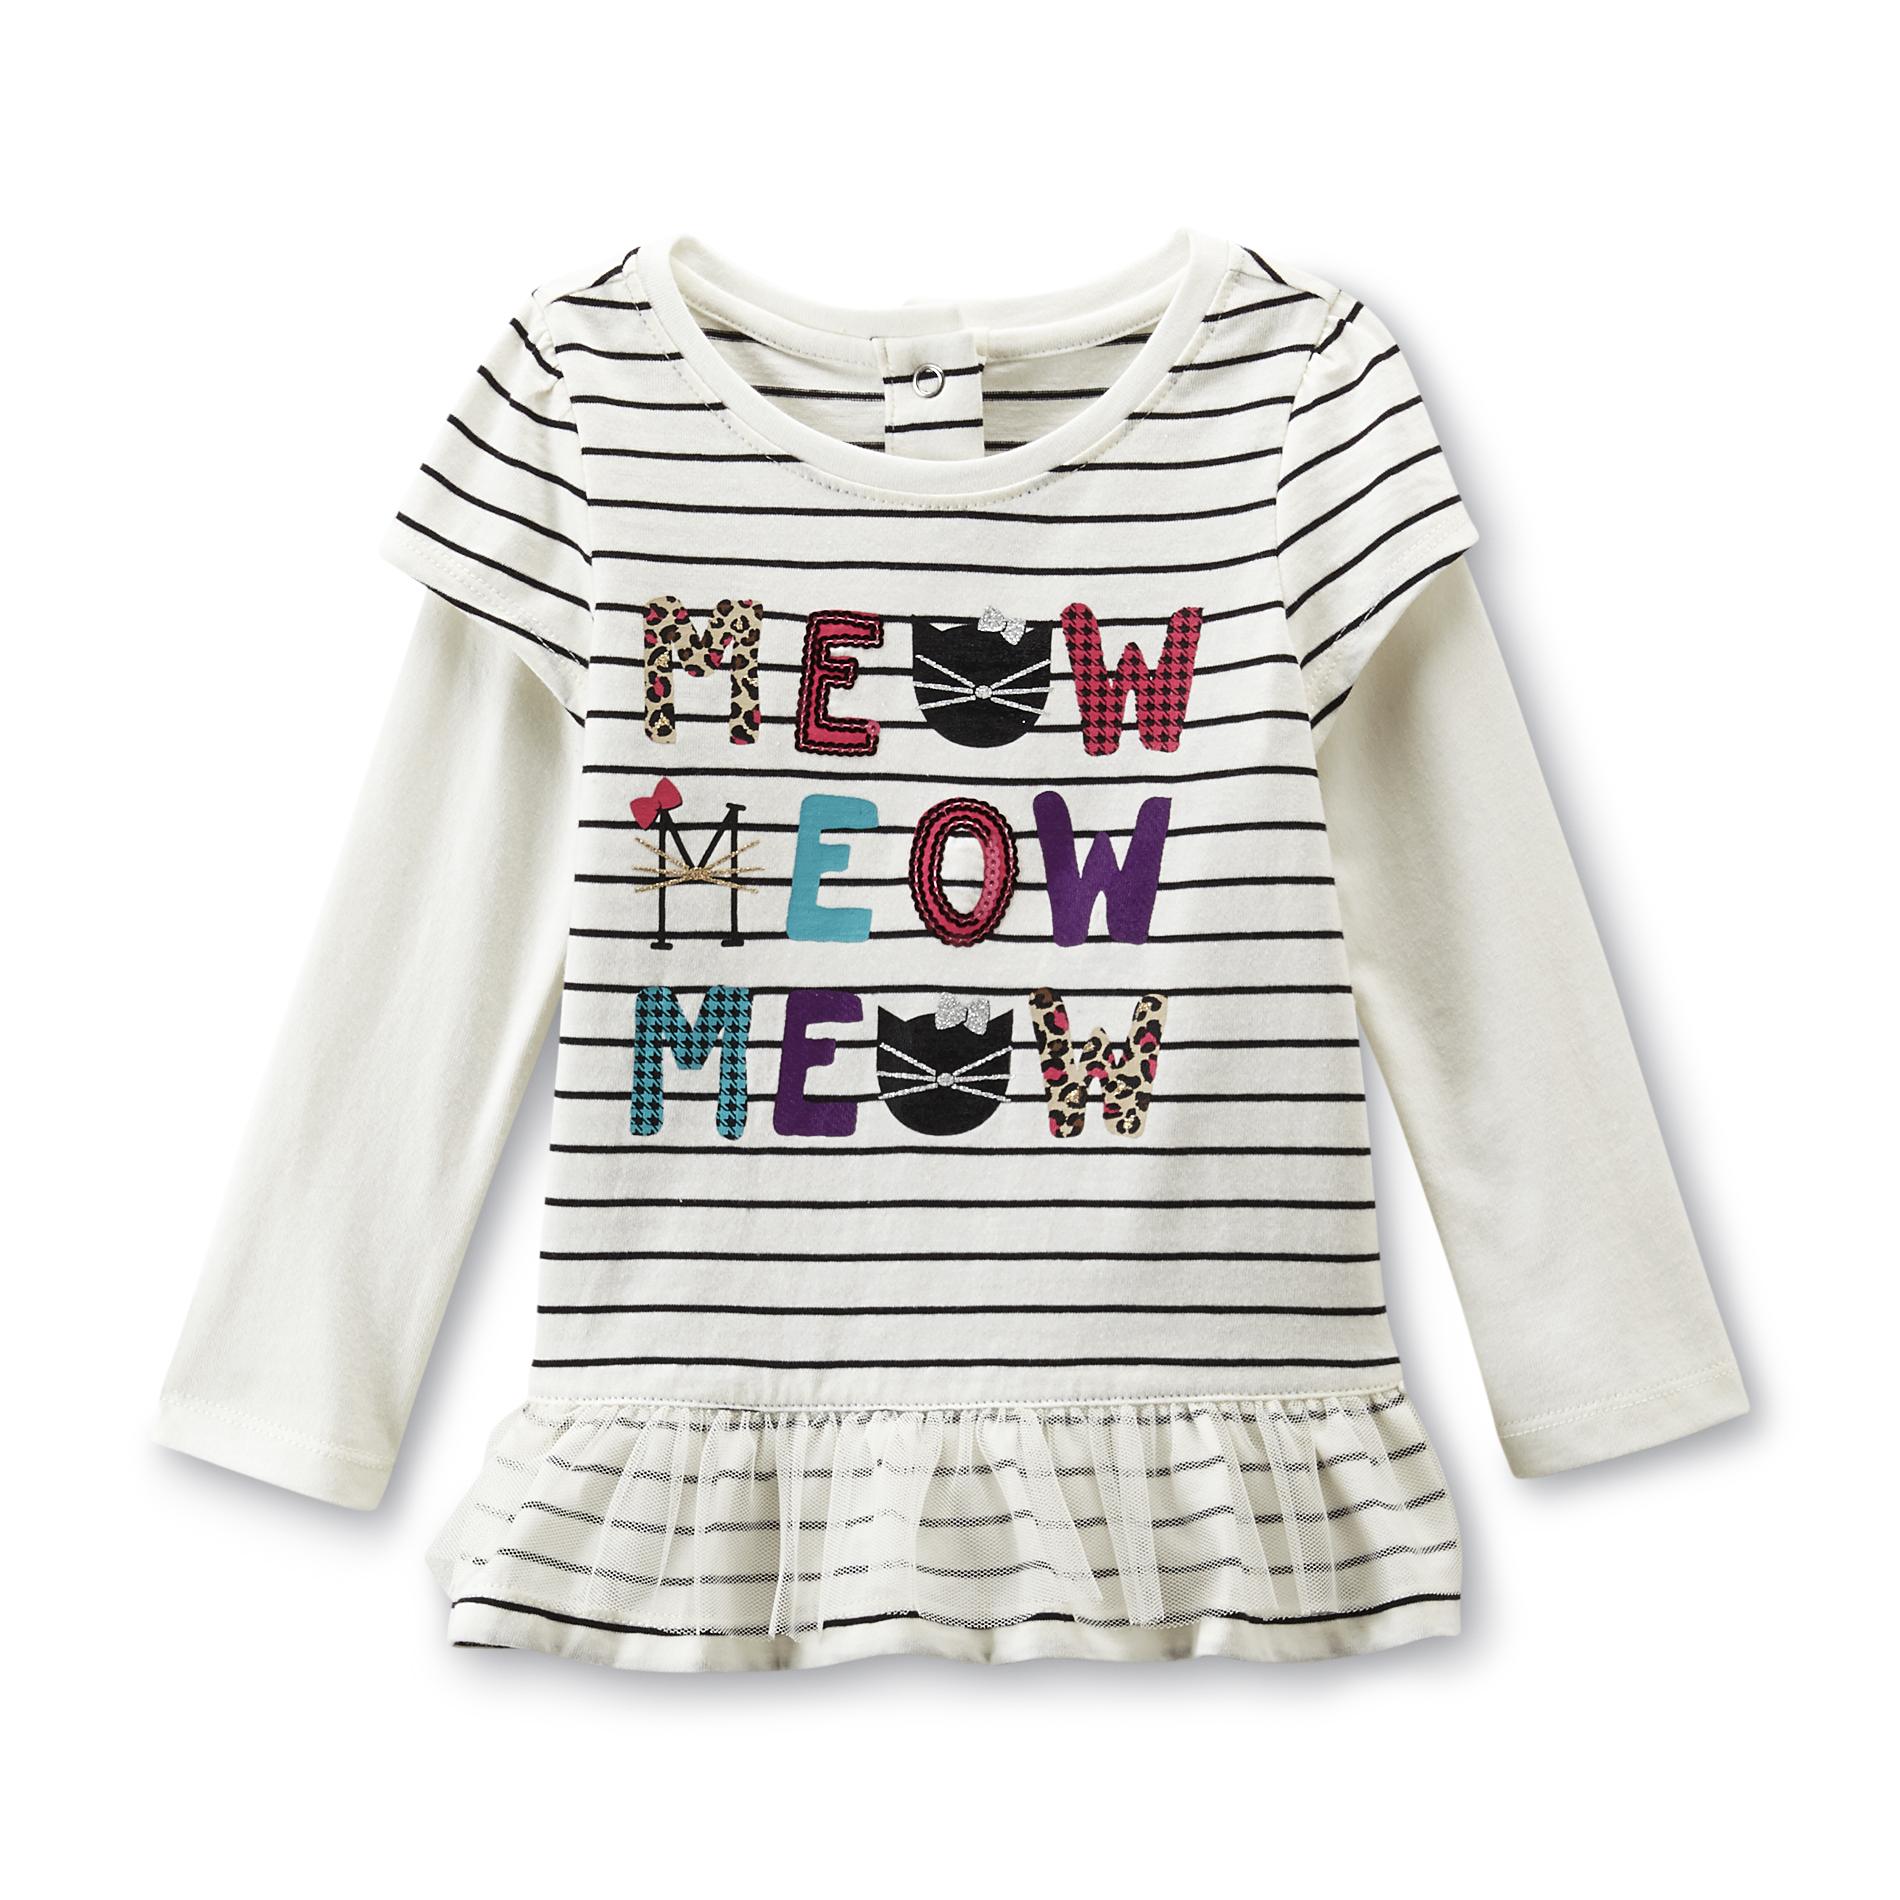 Toughskins Infant & Toddler Girl's Graphic Tunic Top - Cats & Stripes